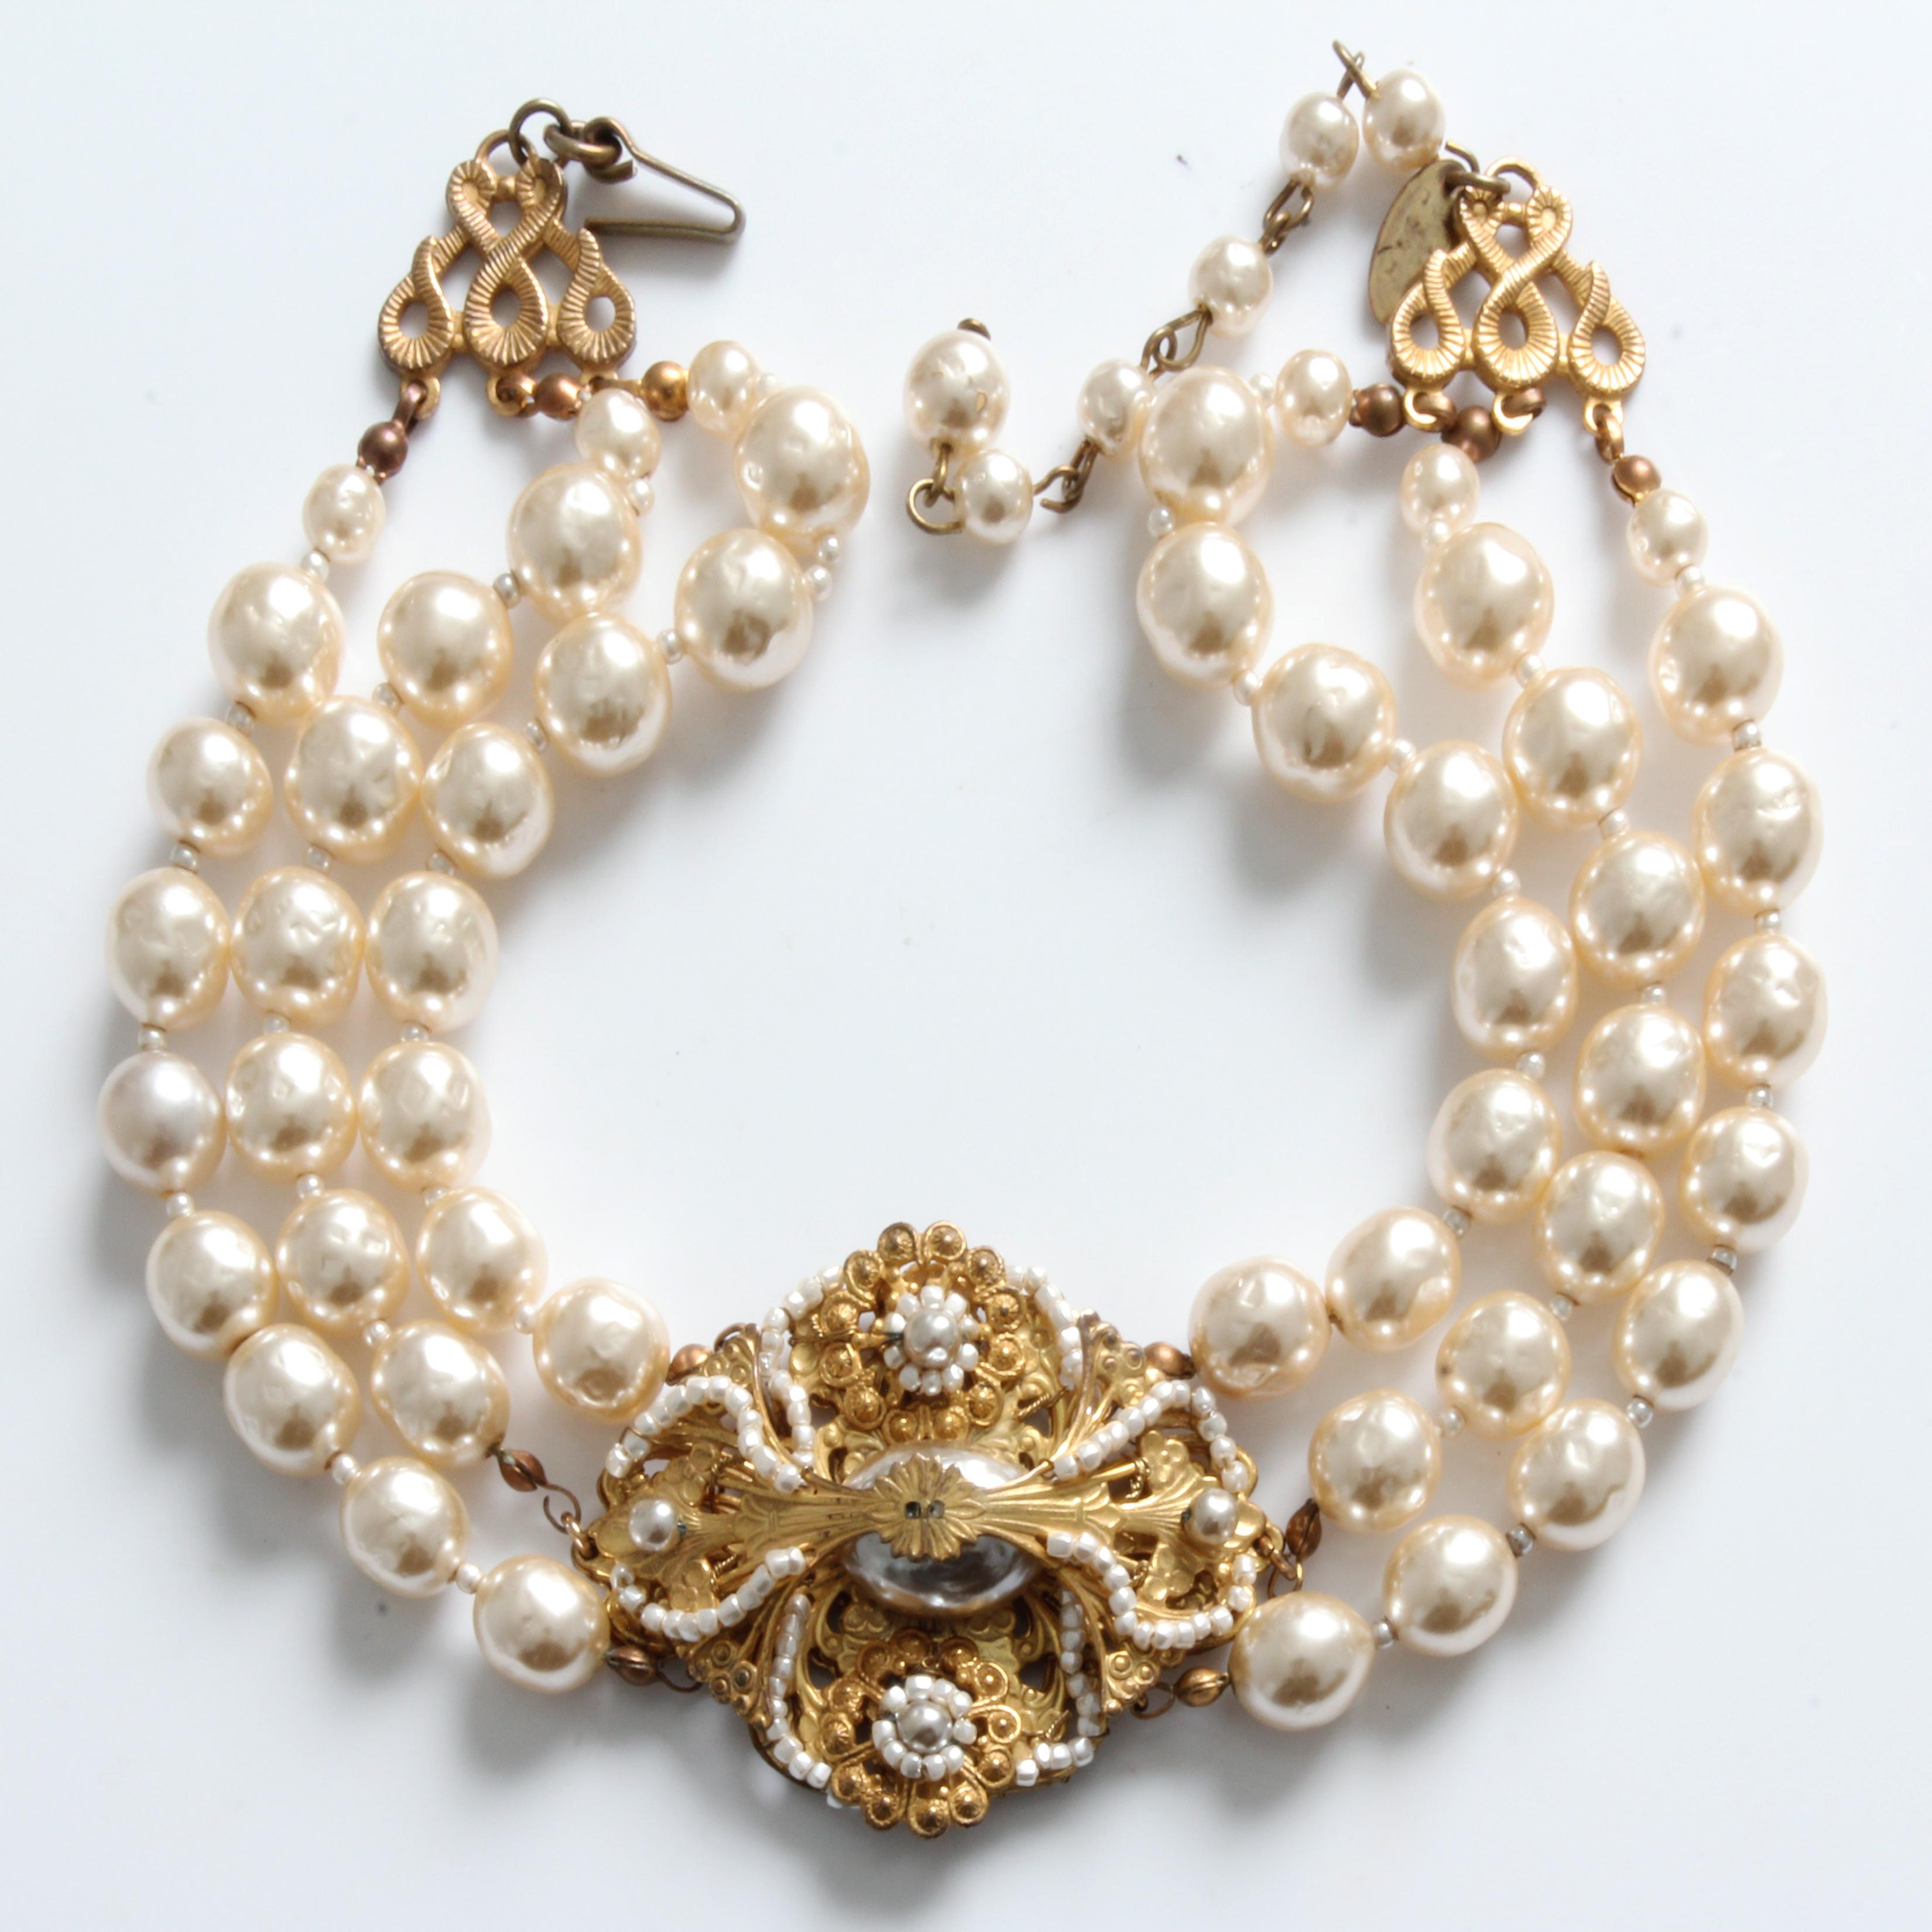 Women's or Men's Miriam Haskell Choker Necklace Gold Filigree & Baroque Glass Pearls Multi-Strand